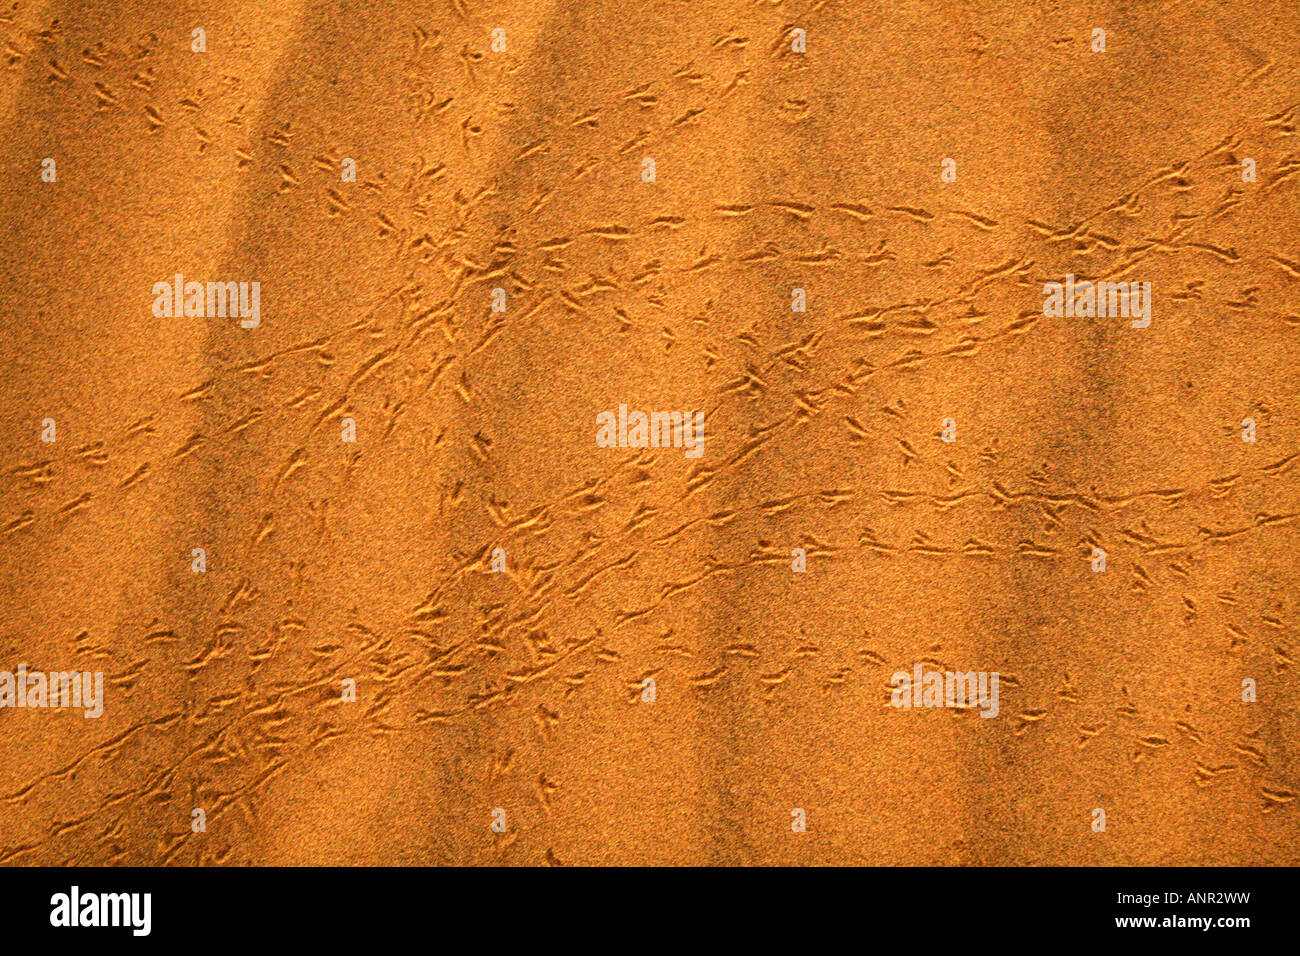 Traces of dung beetles in the desert sand Stock Photo